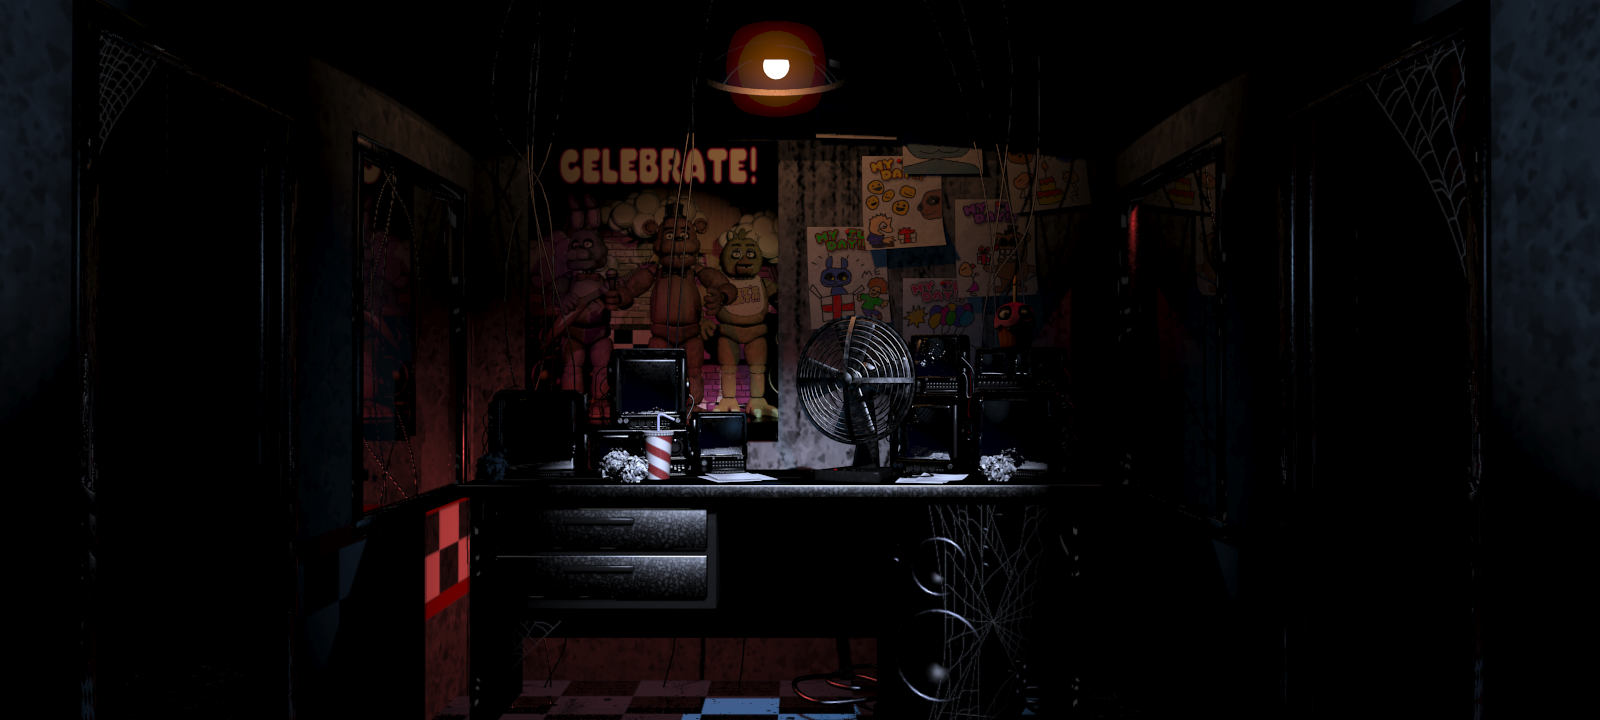 Total 49+ imagen five nights at freddy’s office